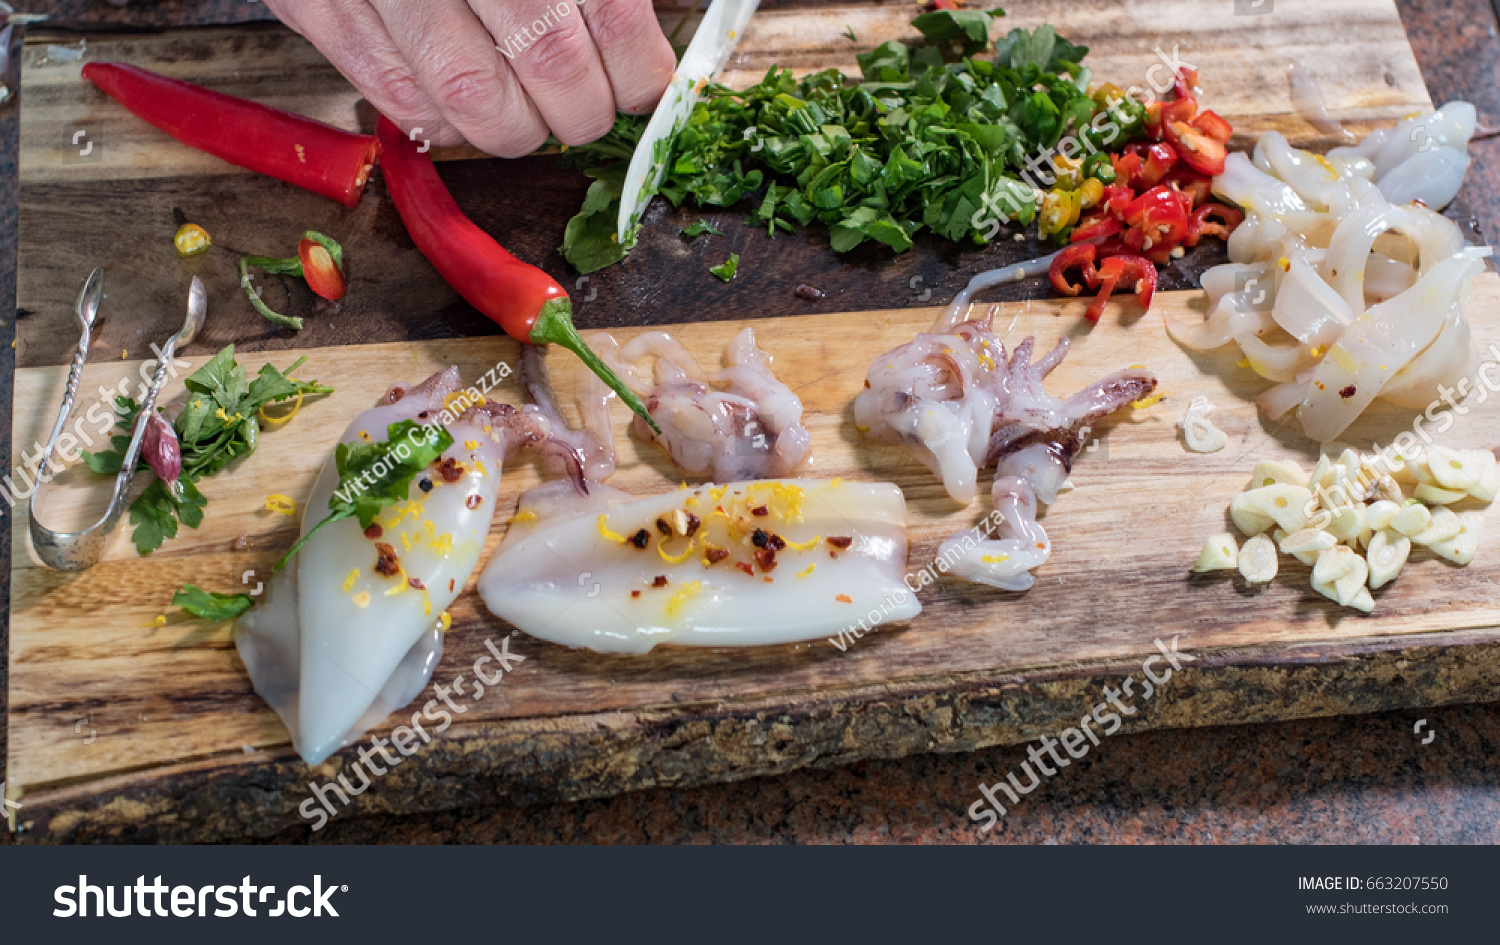 preparing ingredients for black pasta with squids (cuttlefish) and ink: cutting parsley #663207550